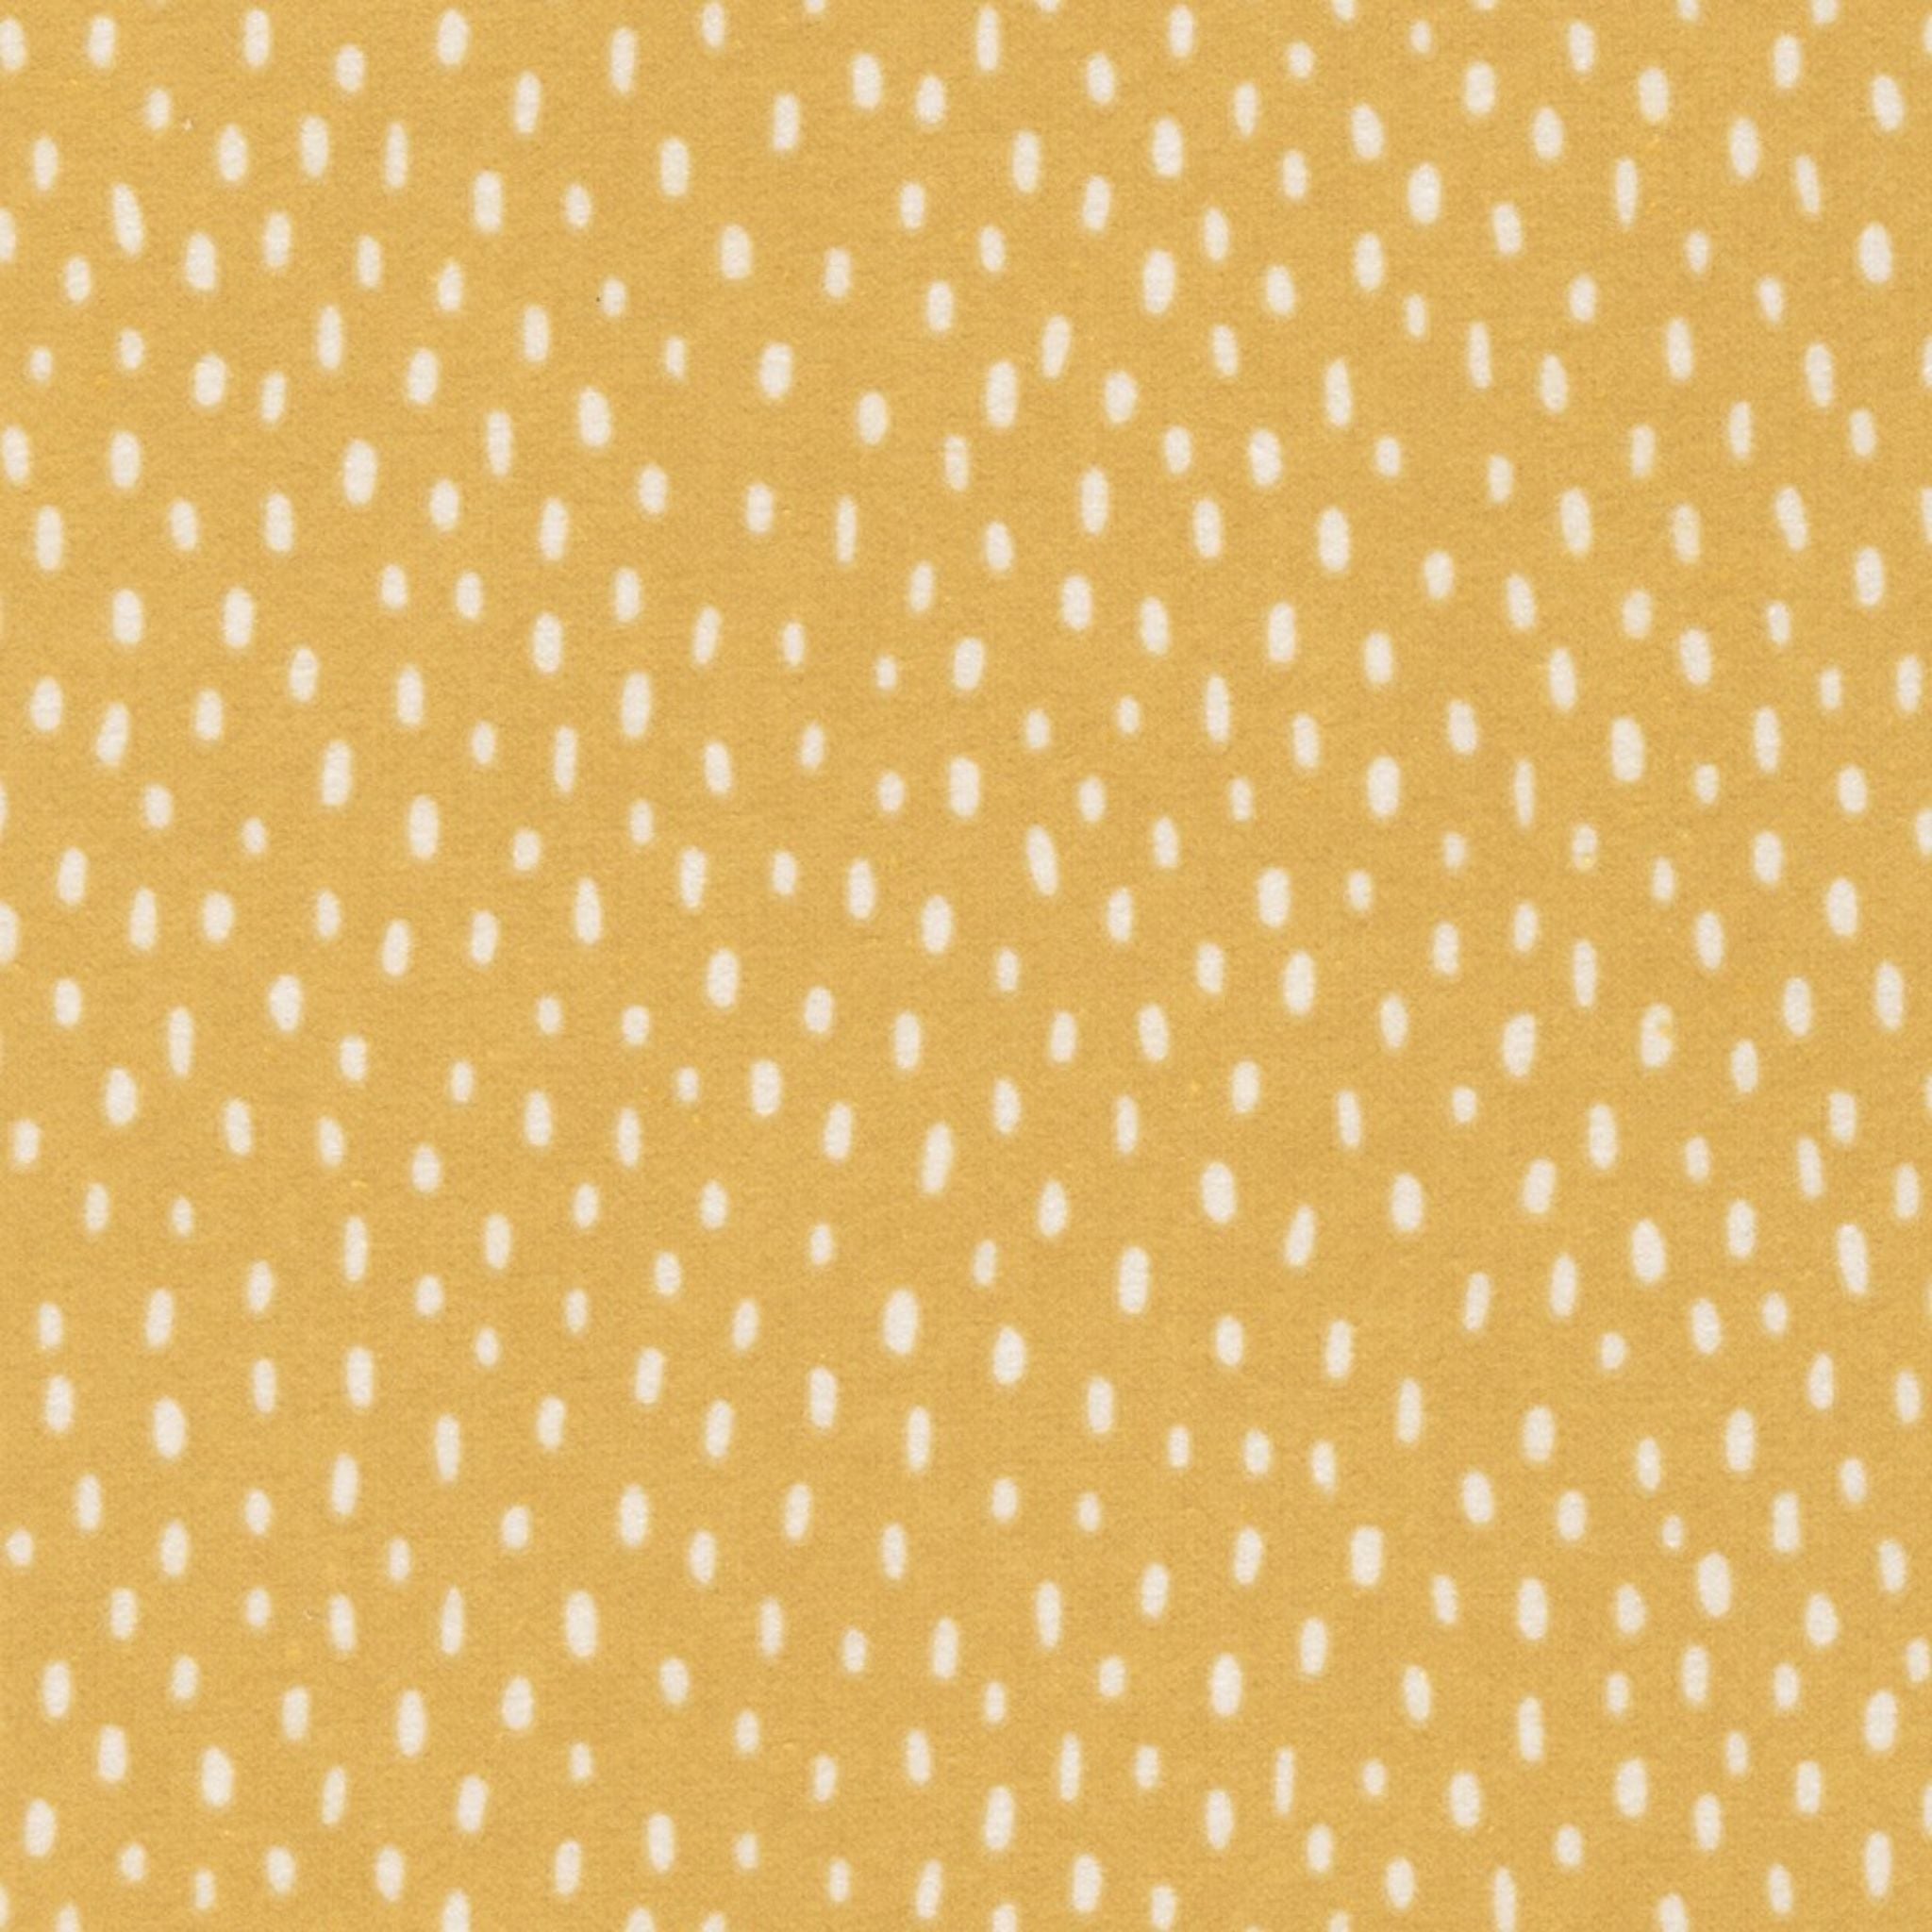 Raindrops on mustard brushed cotton - Over the Rainbow Cozy Cotton by Robert Kaufman